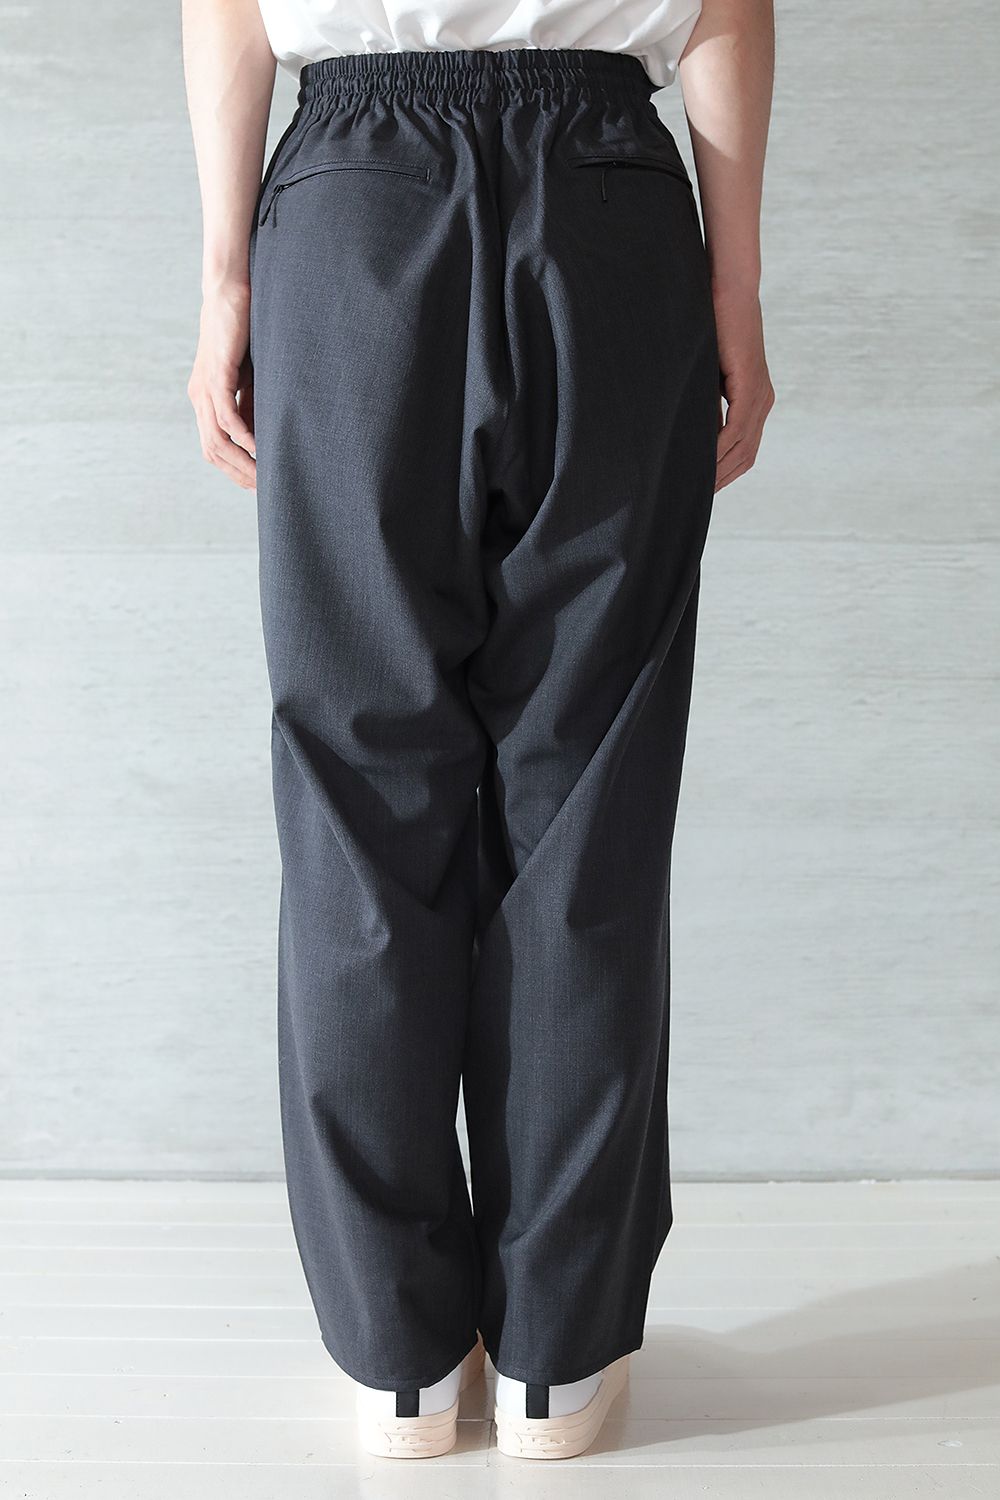 M CLASSIC REFINED WOOL STRECH CROPPED WIDE LEG PANTS(CHARCOAL) - S